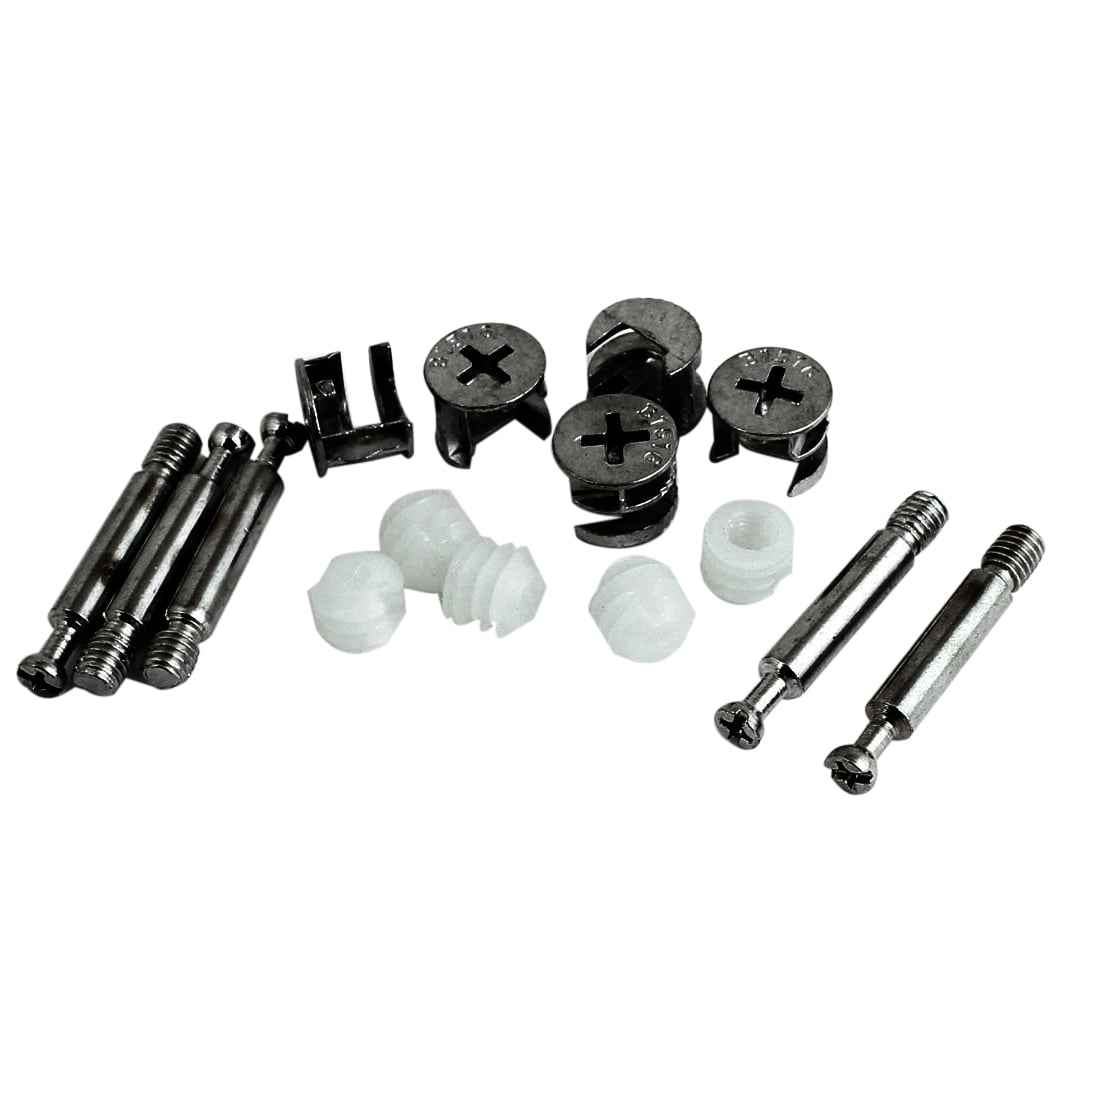 Uxcell a16071200ux0175 Furniture Cabinet Fixing Screw Locking Cam Bolt Pre-Inserted Nut Fitting 15mm Dia 20 Sets